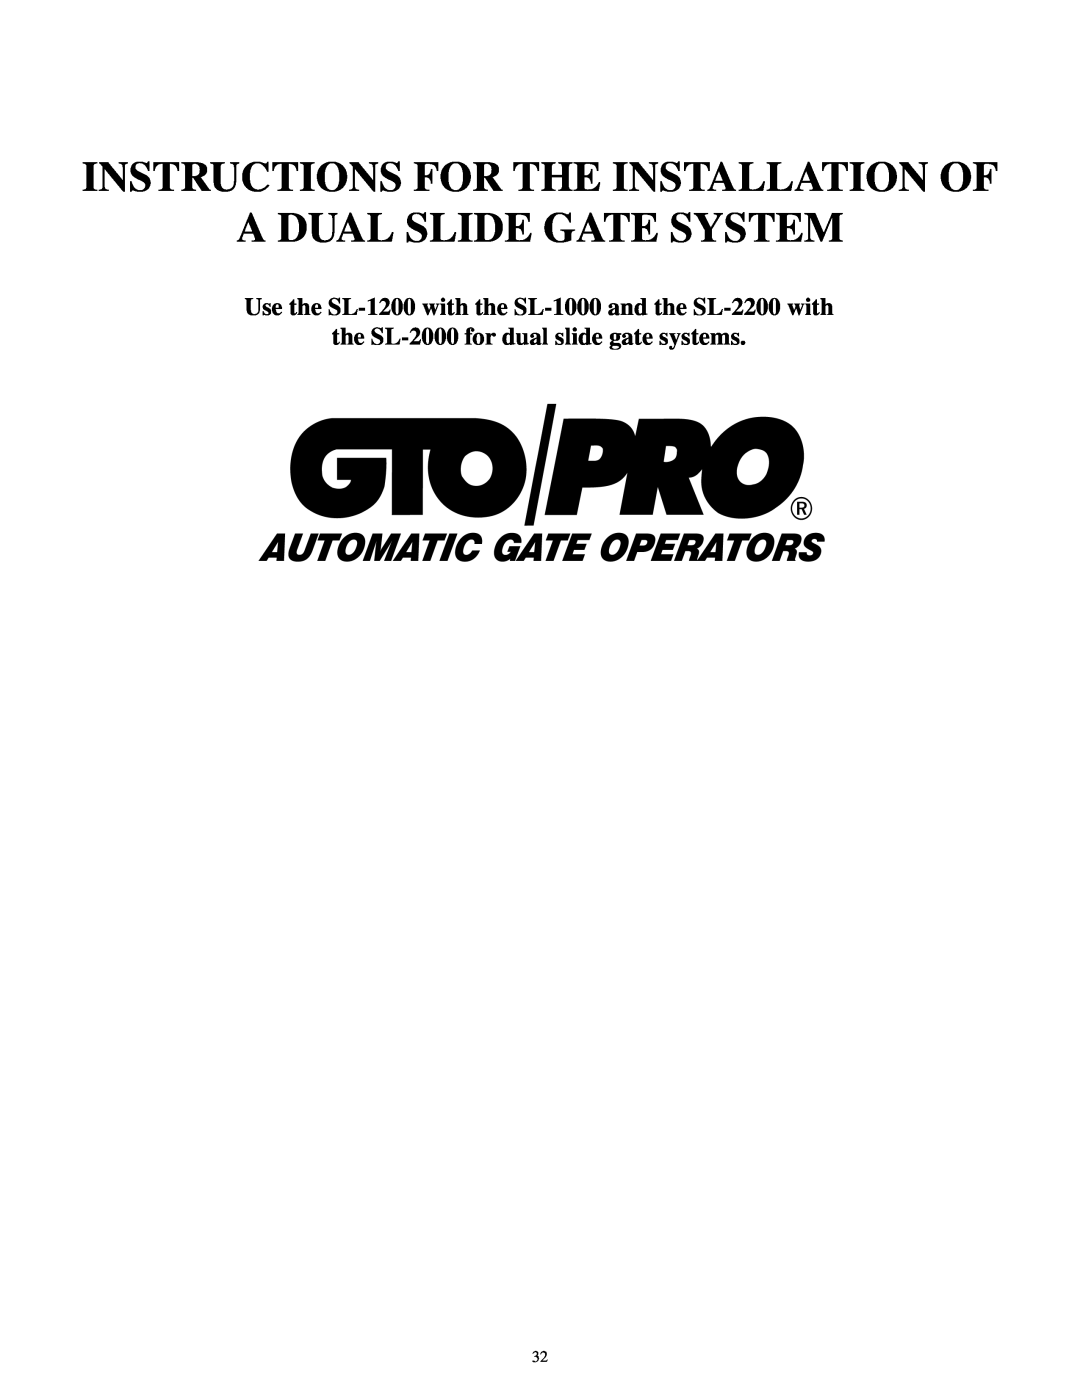 GTO SL-1000B Instructions For The Installation Of A Dual Slide Gate System, the SL-2000 for dual slide gate systems 